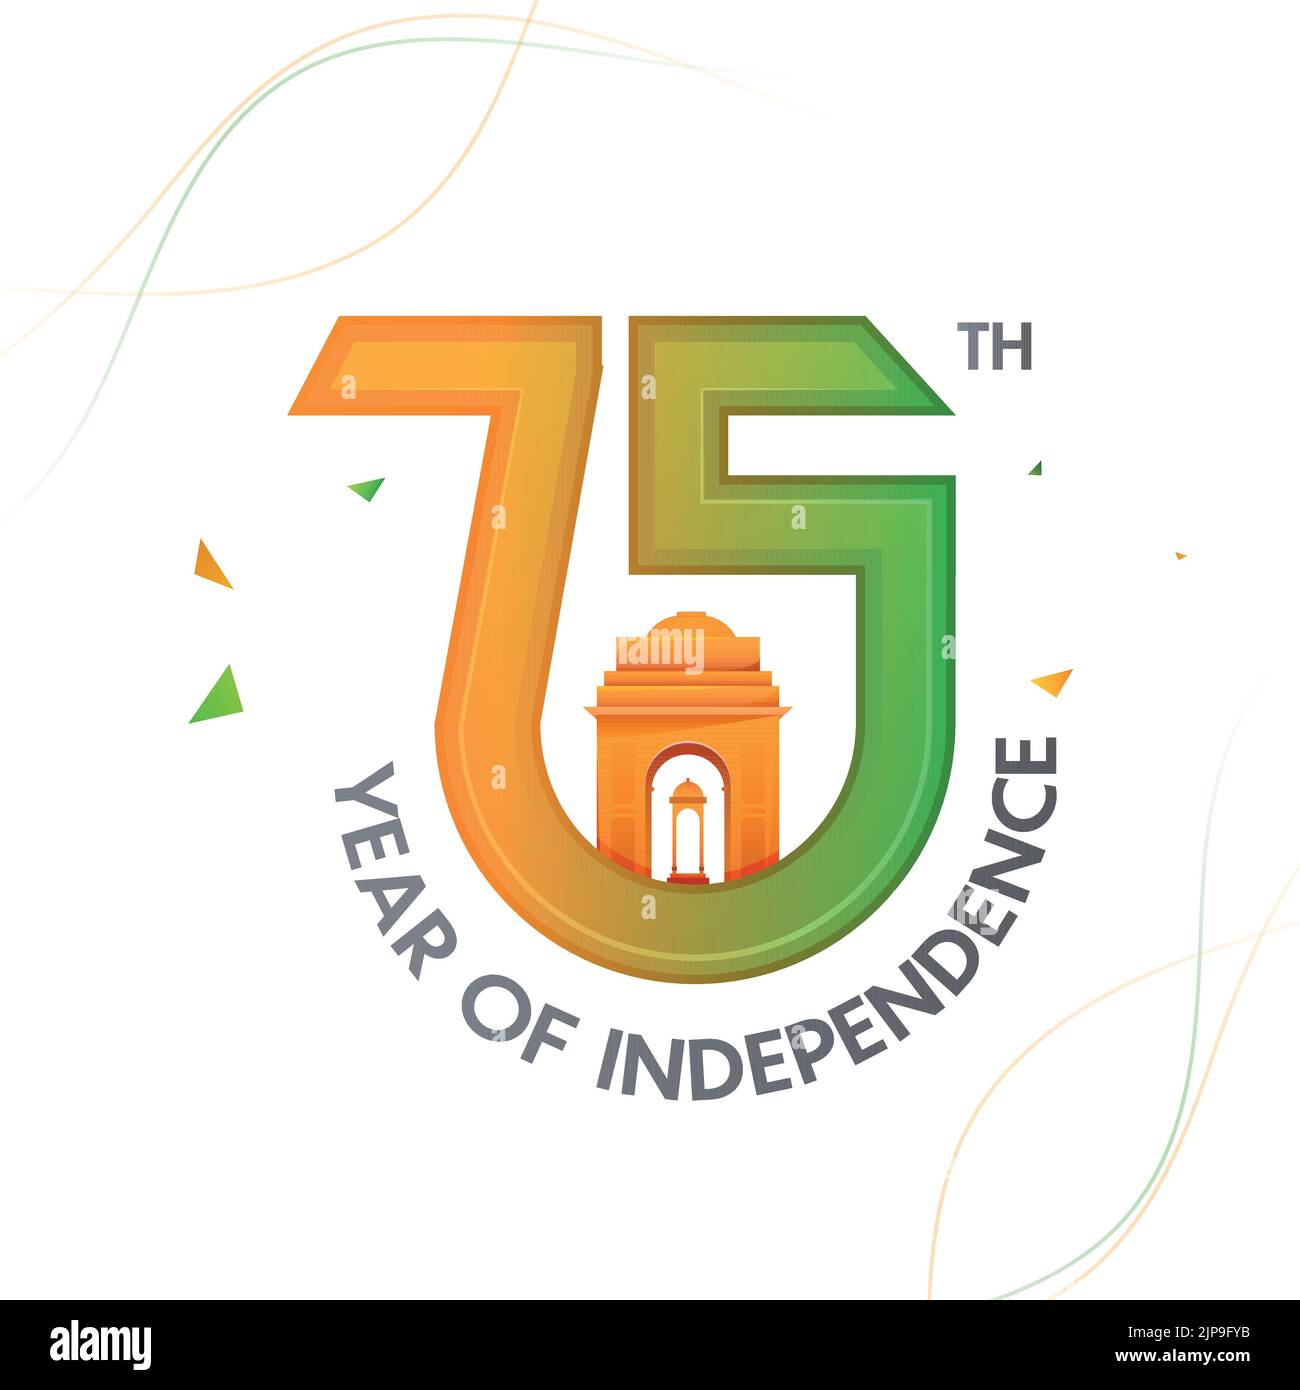 75 Years of Indian Independence Day Celebration Concept with India Gate, Monument for Indian Martyrs. Stock Vector